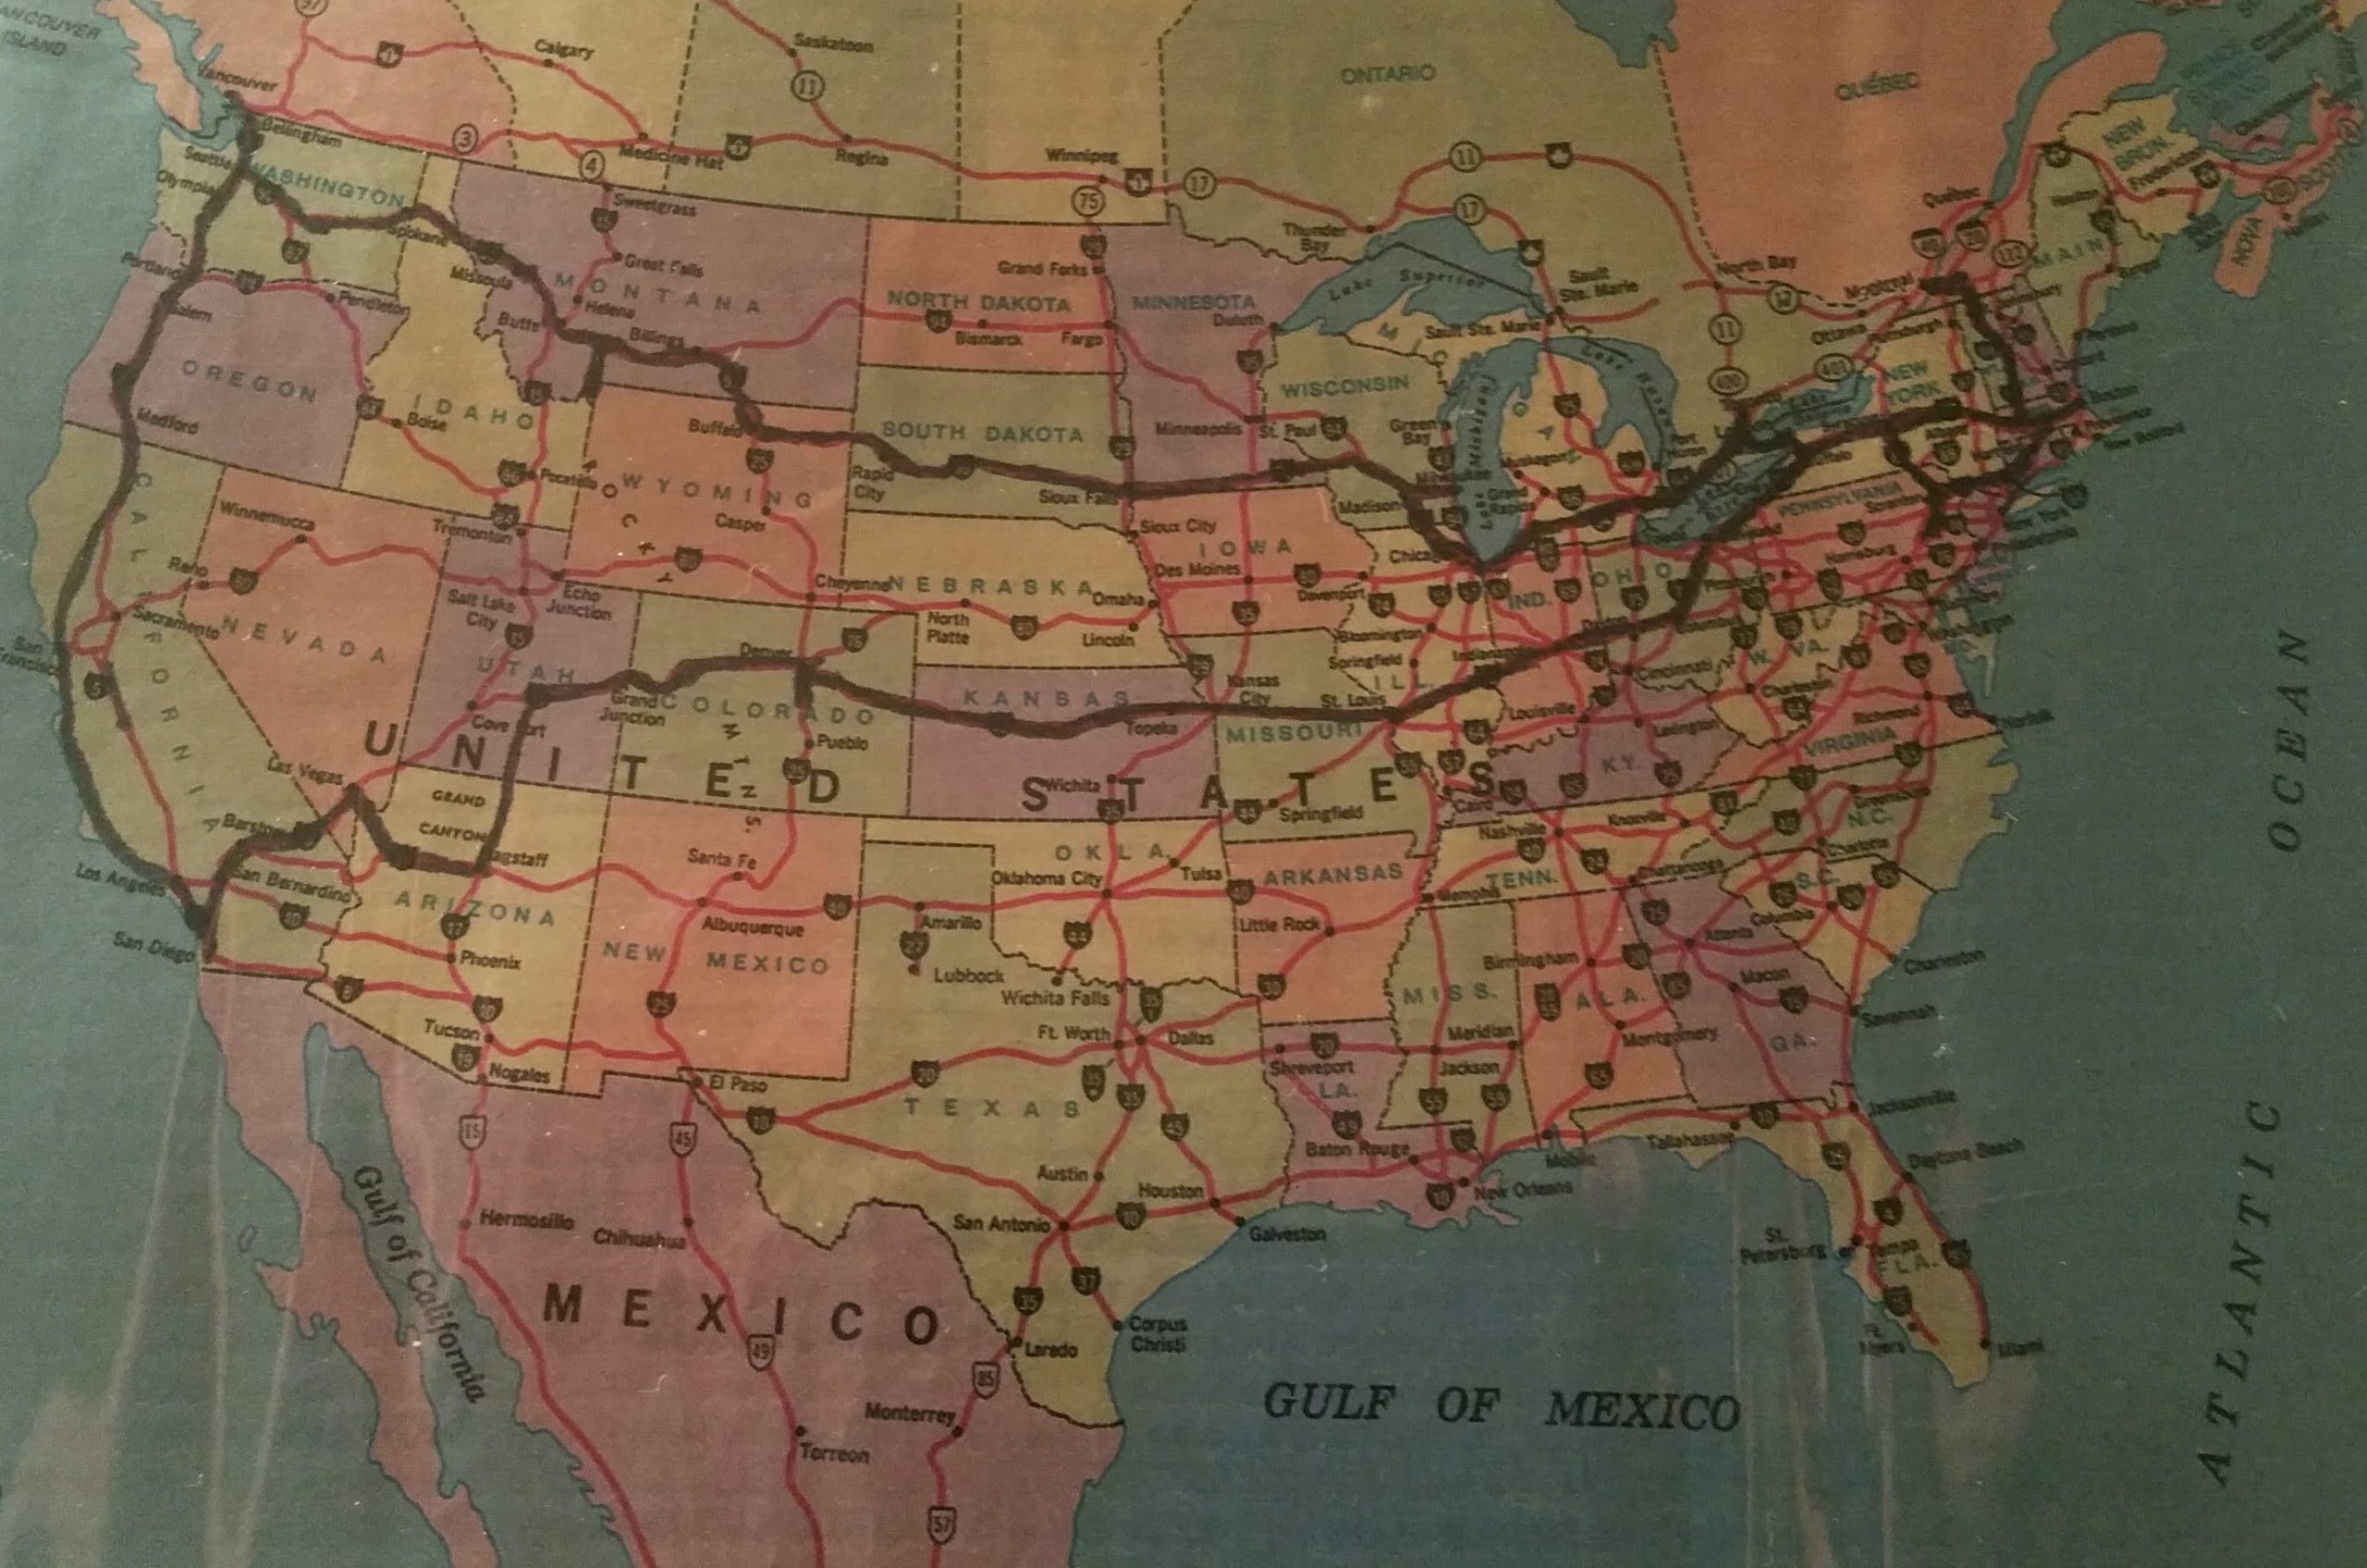 US RoadTrip Map from 1988